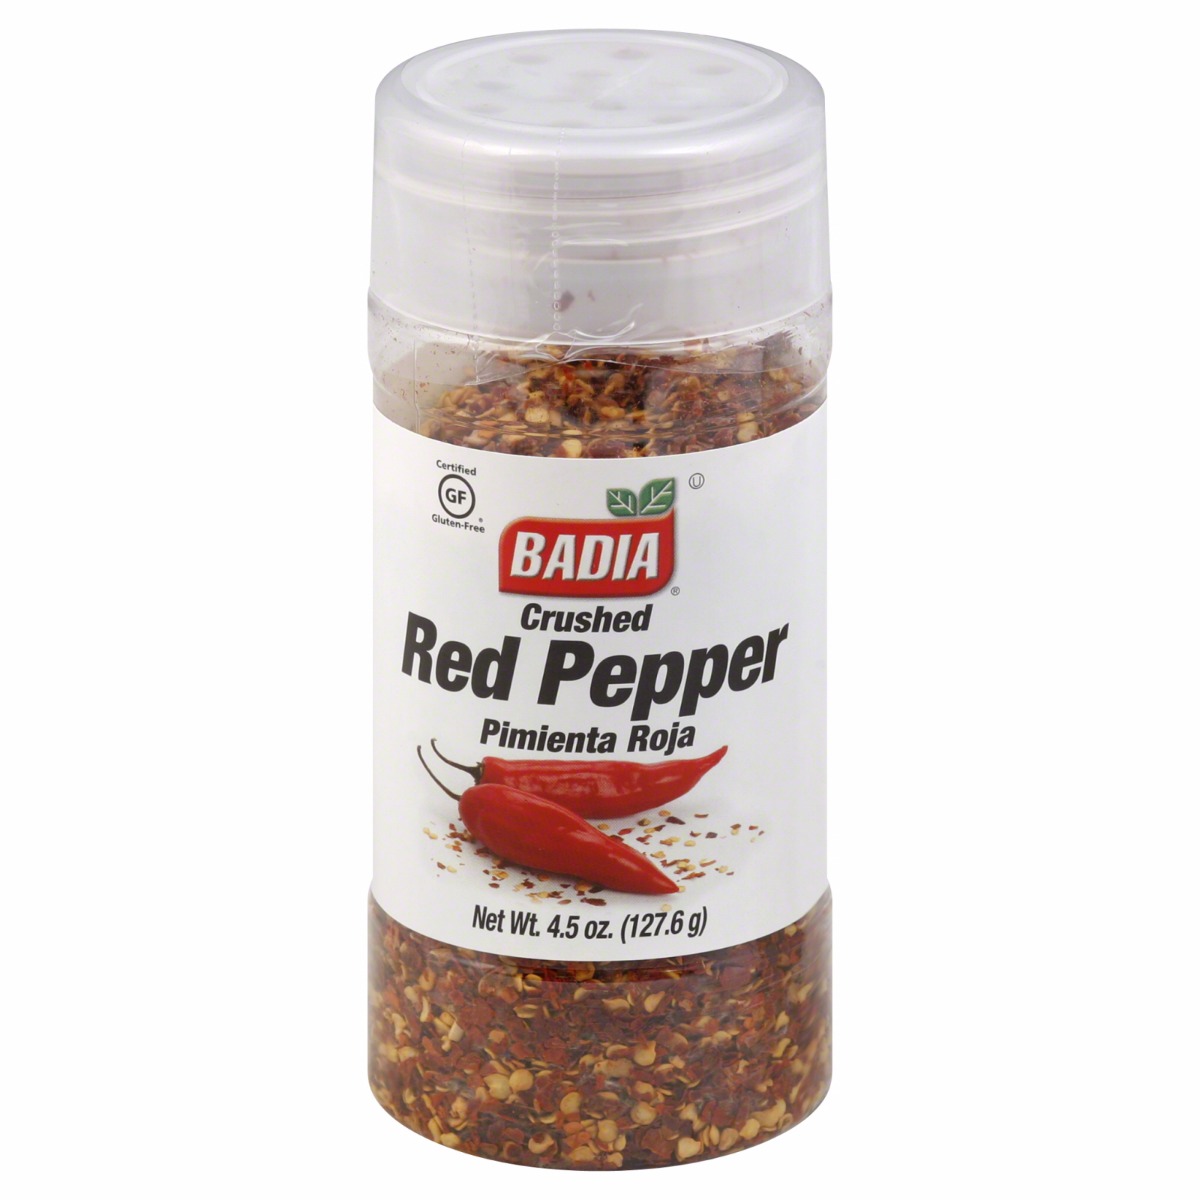 Picture of Badia KHFM00117660 Crushed Red Pepper, 4.5 oz